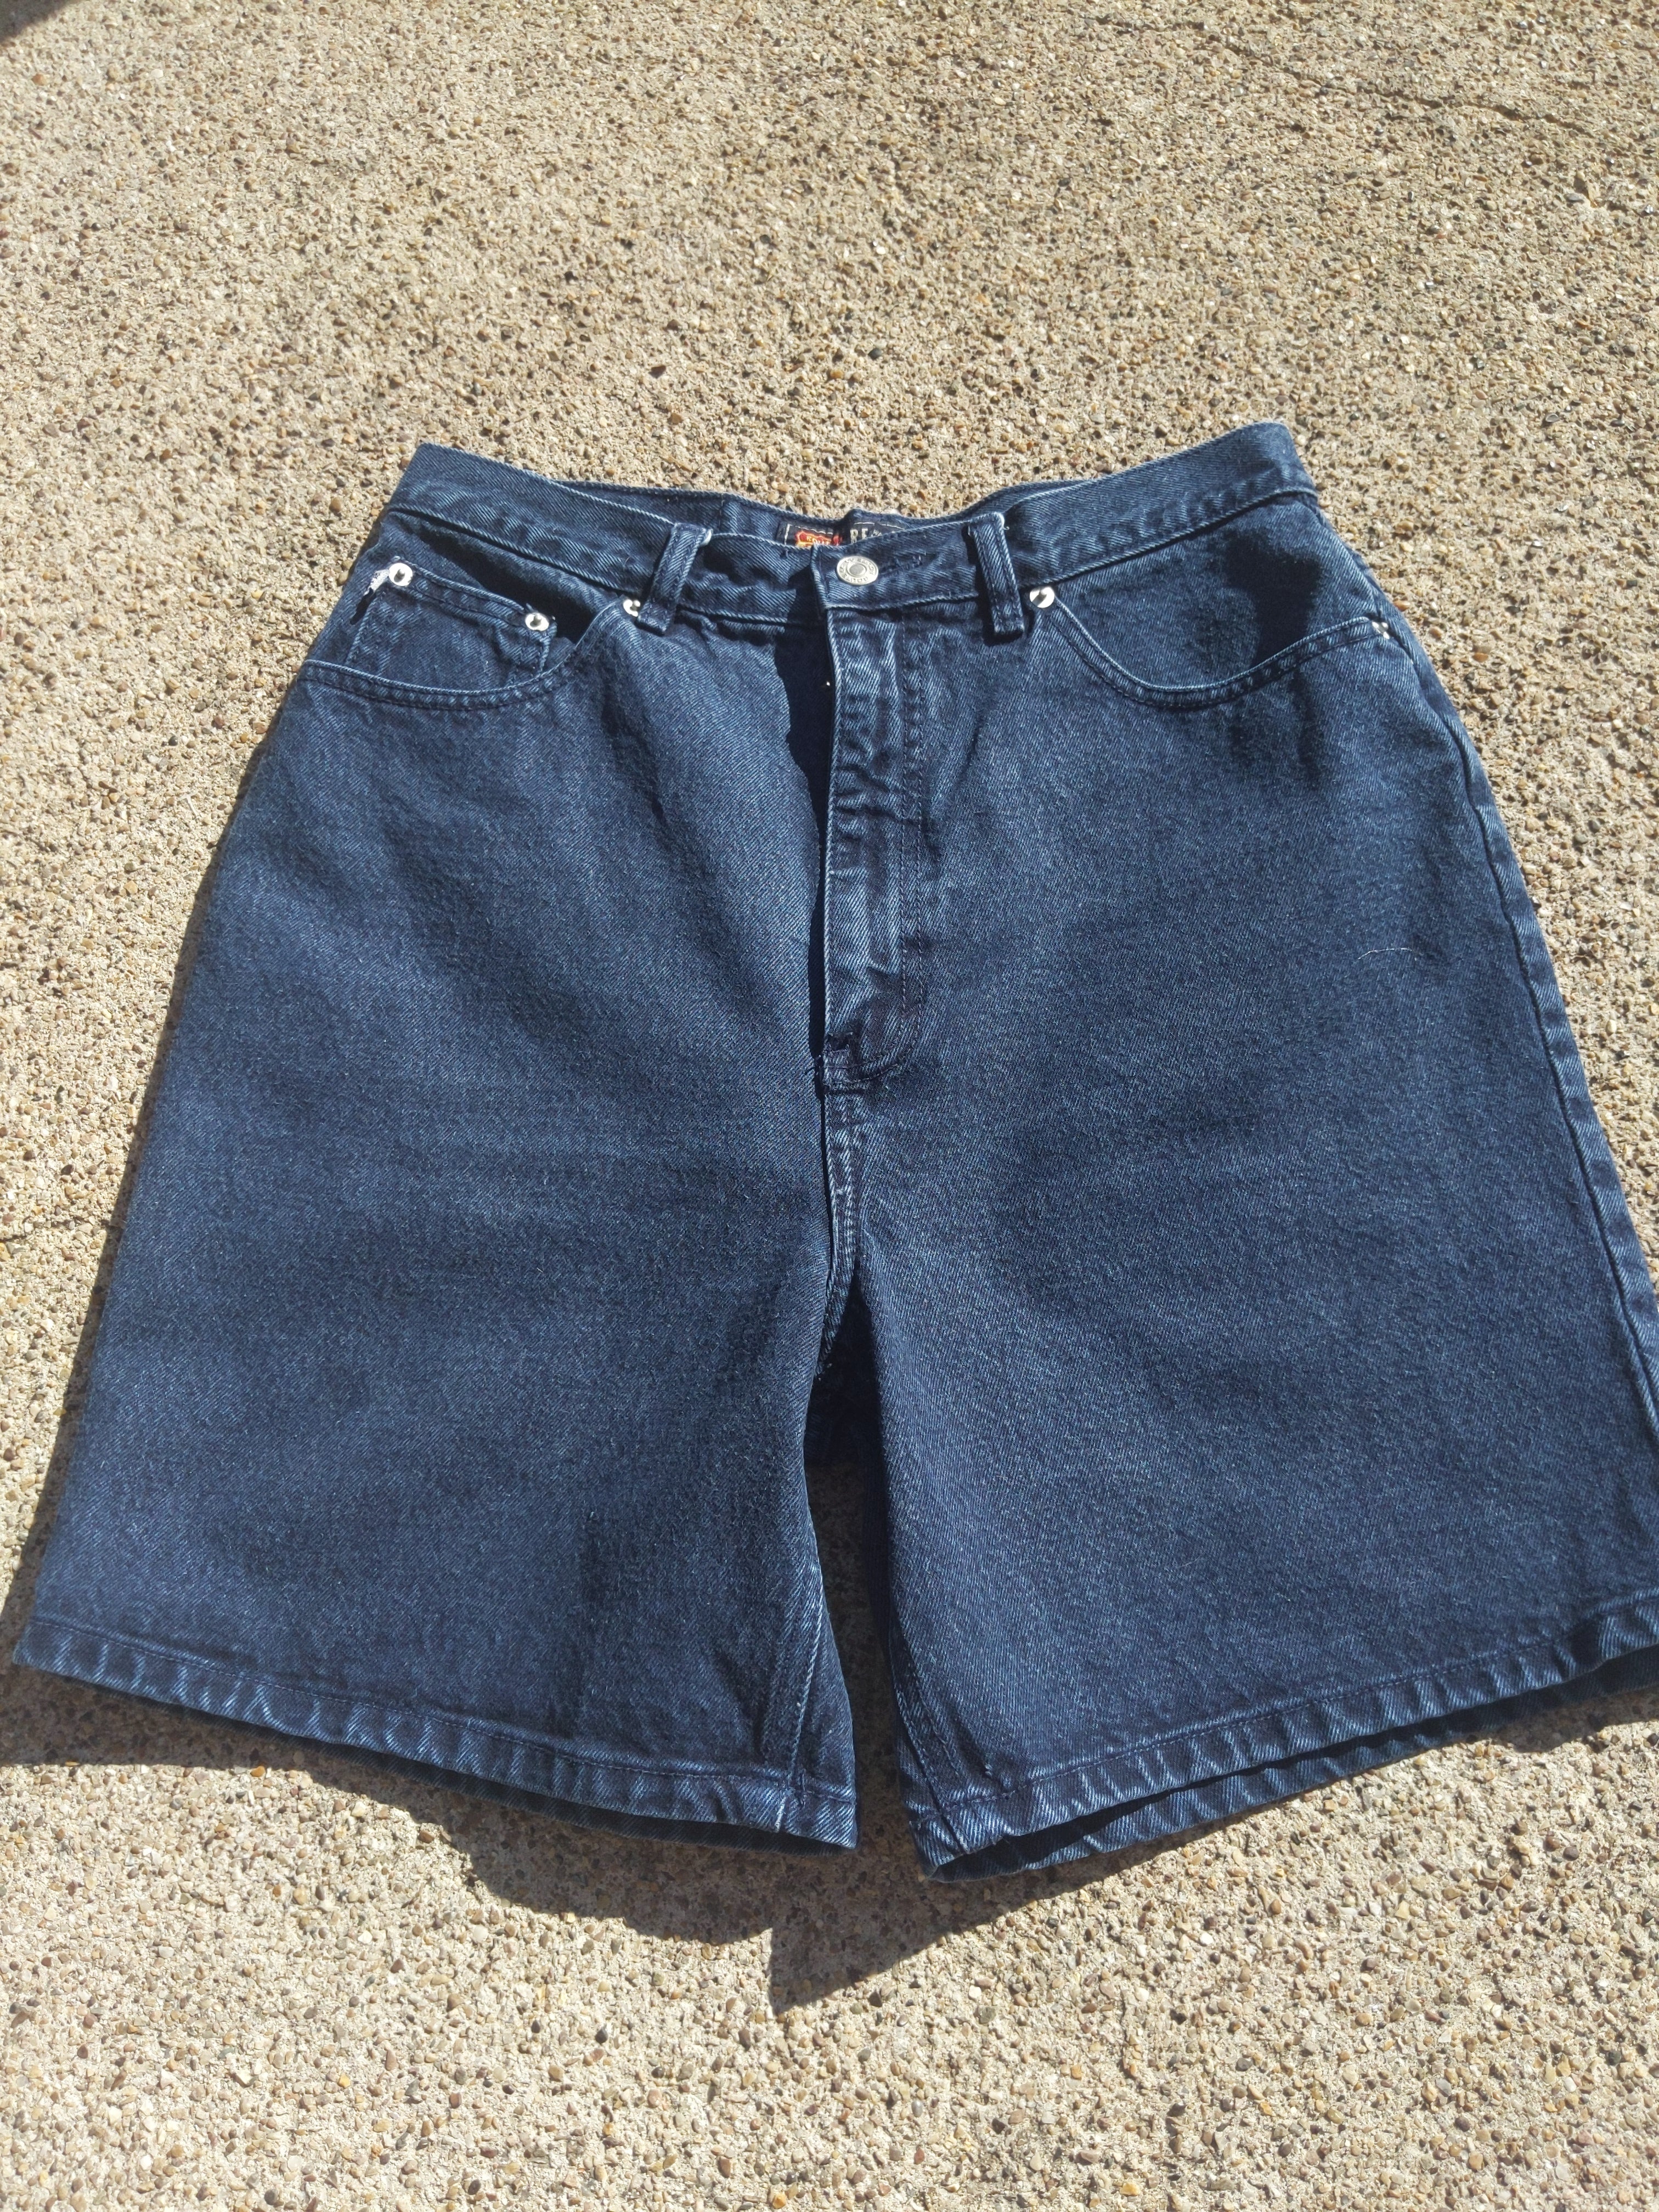 Vintage Route 66 high waisted denim shorts 30"